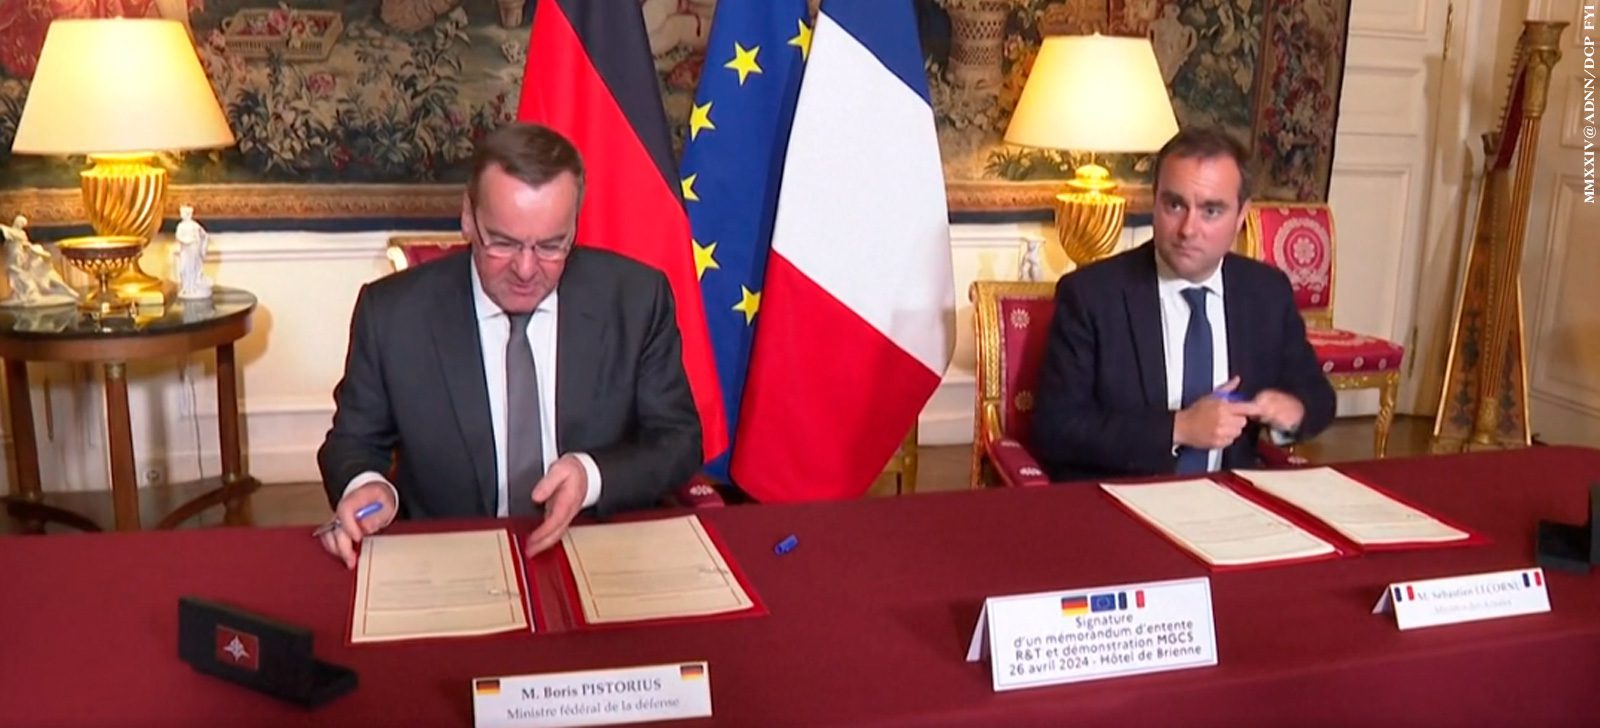 France and Germany sign agreement to develop 'tank of the future'